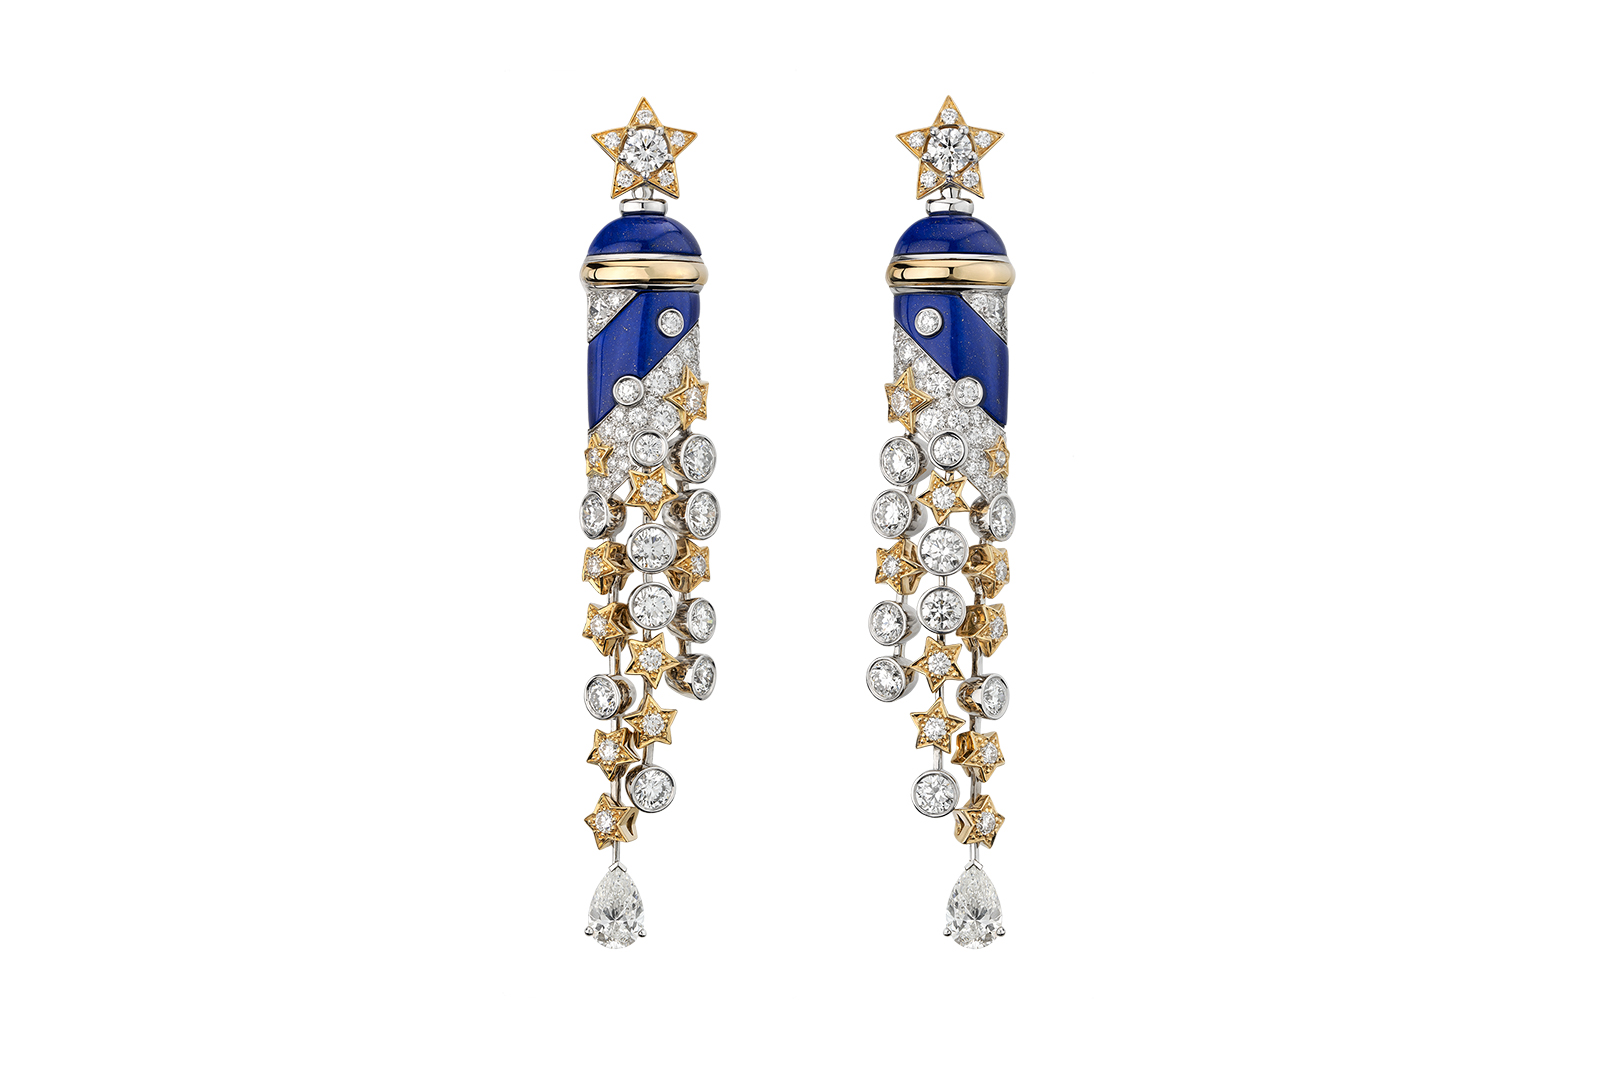 Chanel channels Venice in Escale à Venise high jewellery collection